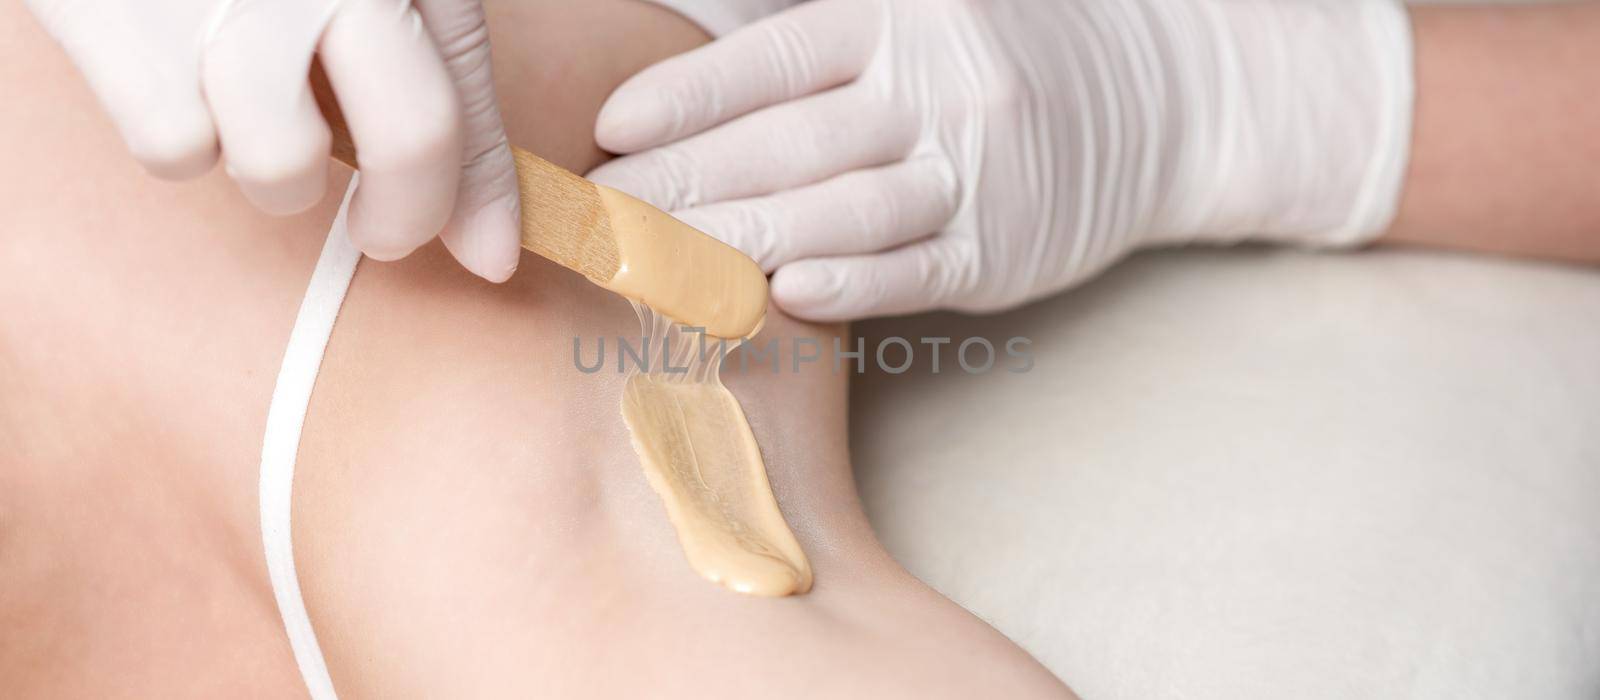 Depilation and epilation female armpit with liquid sugar paste by spatula. Hand of cosmetologist applying wax paste on armpit. Smooth underarm concept